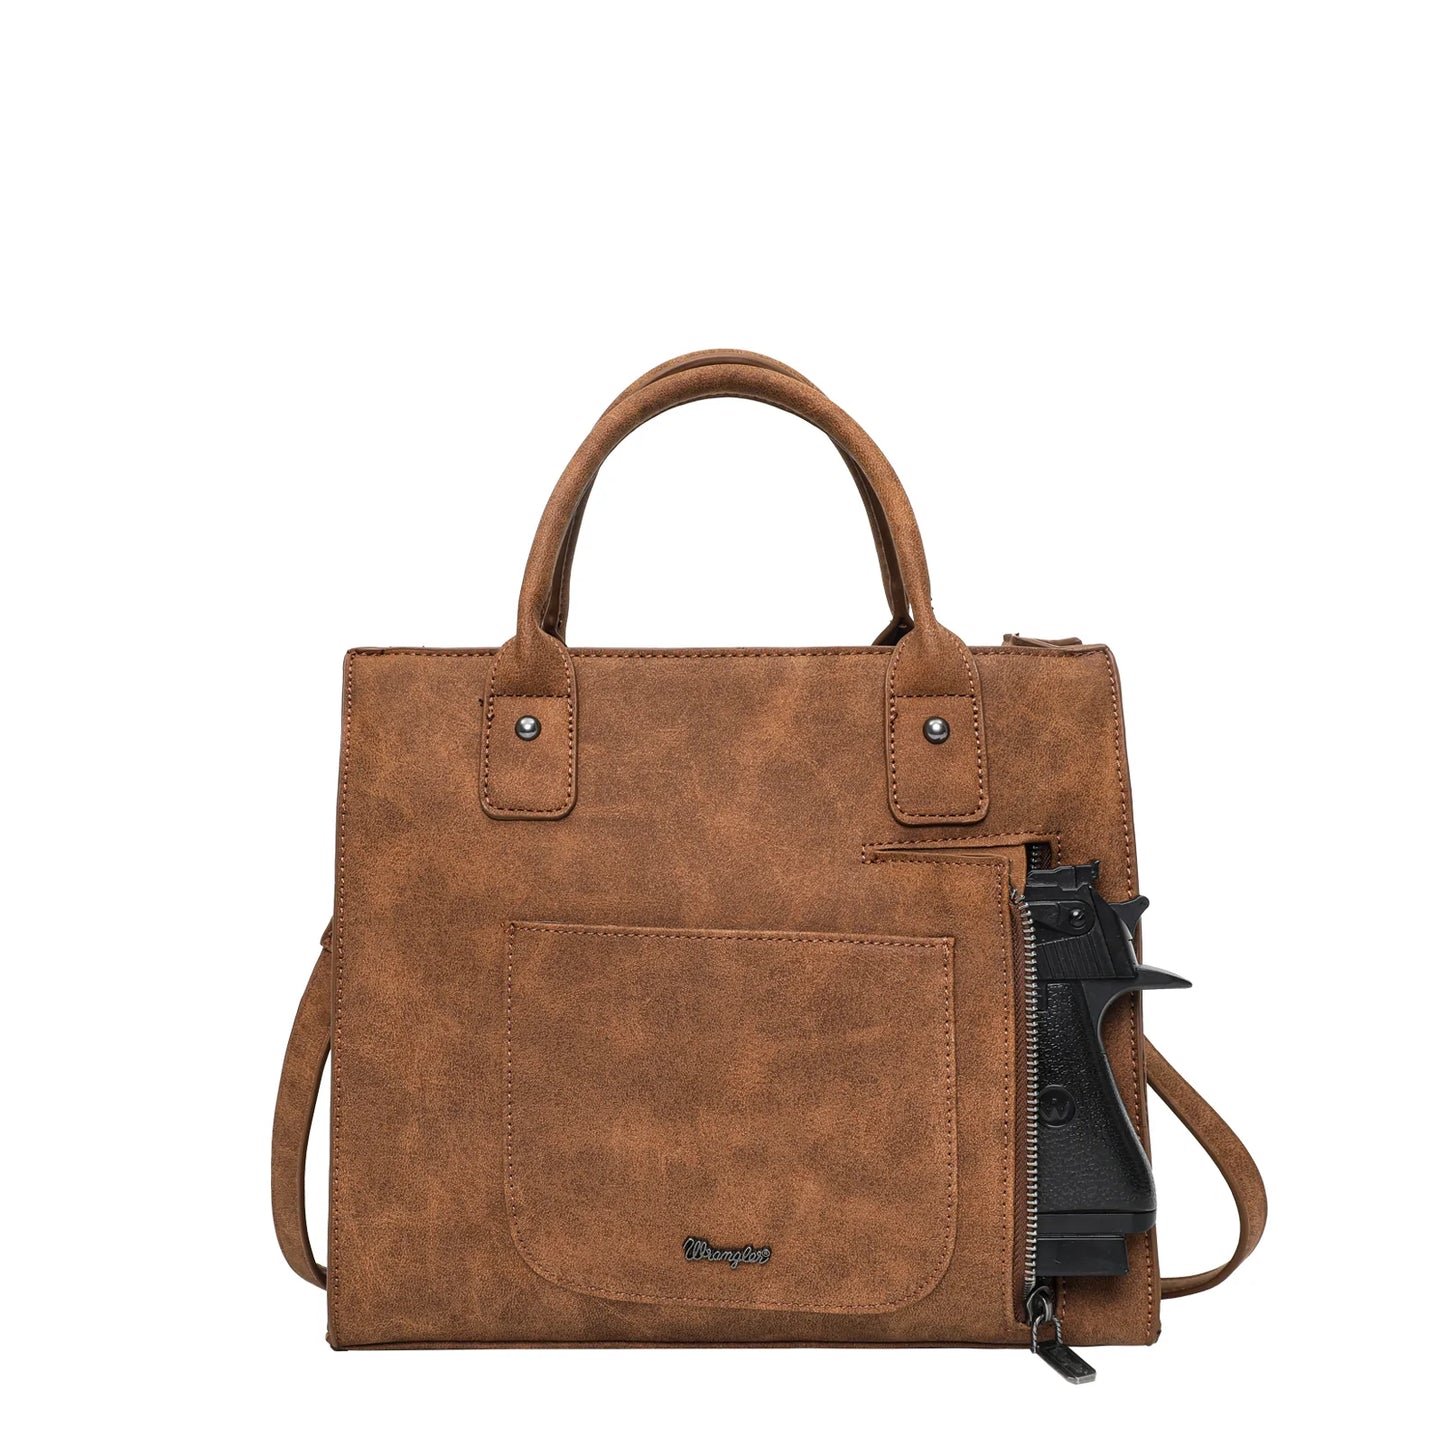 Wrangler Hair-on Collection Concealed Carry Tote/Crossbody